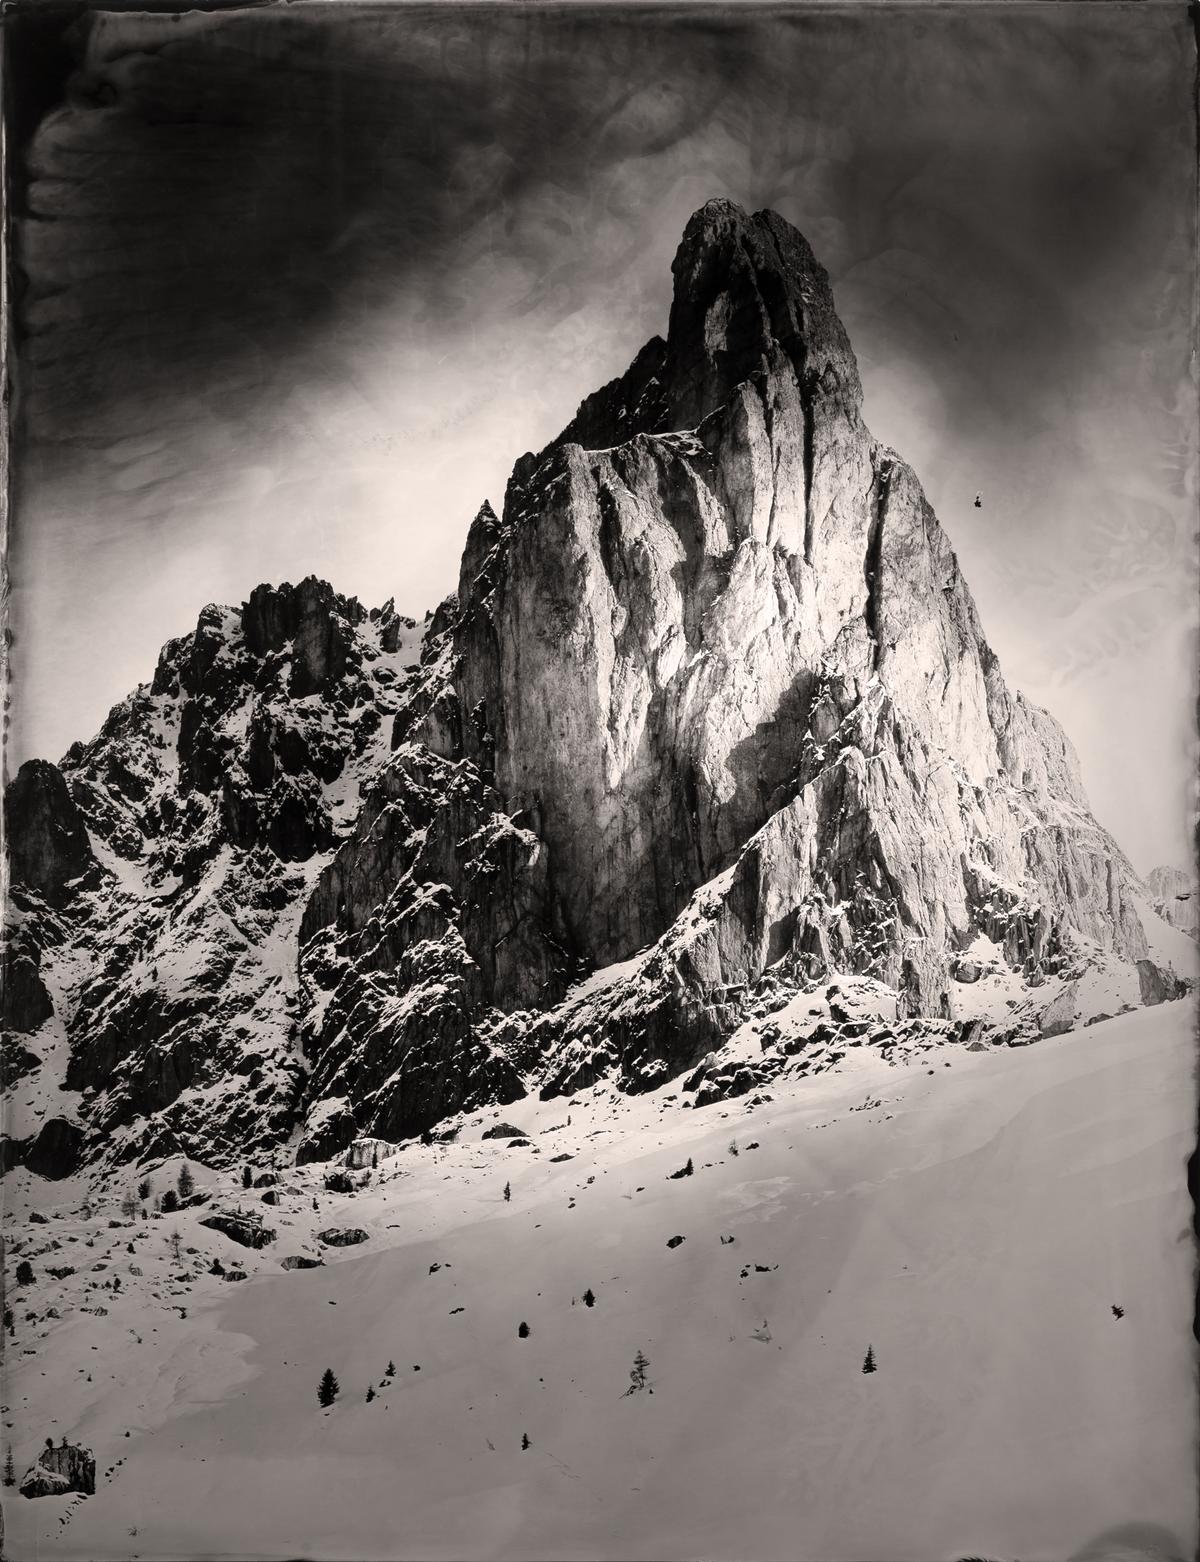 A 35- by 28-inch ambrotype showing the Dolomite Mountains. (Courtesy of <a href="https://www.lightcatcher.it/en/">Lightcatcher</a>)